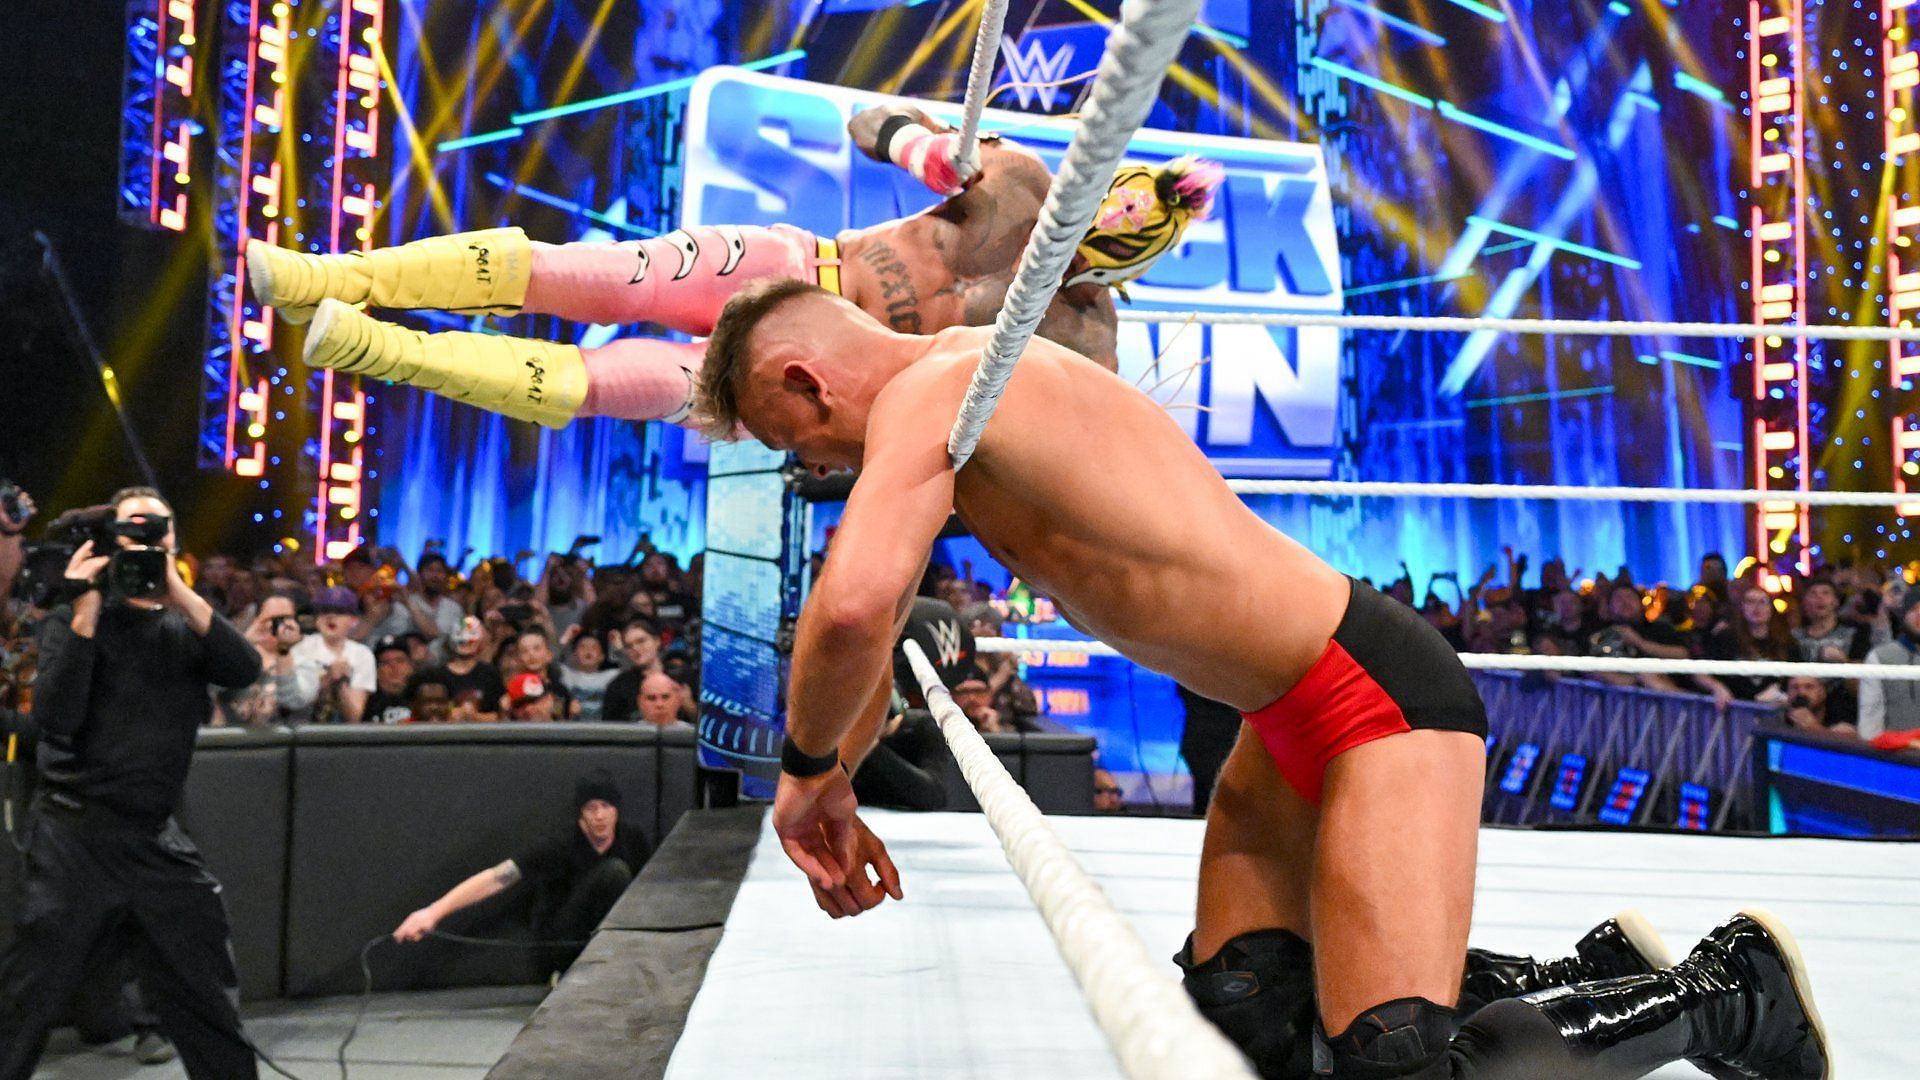 Rey Mysterio recently moved from WWE RAW to SmackDown